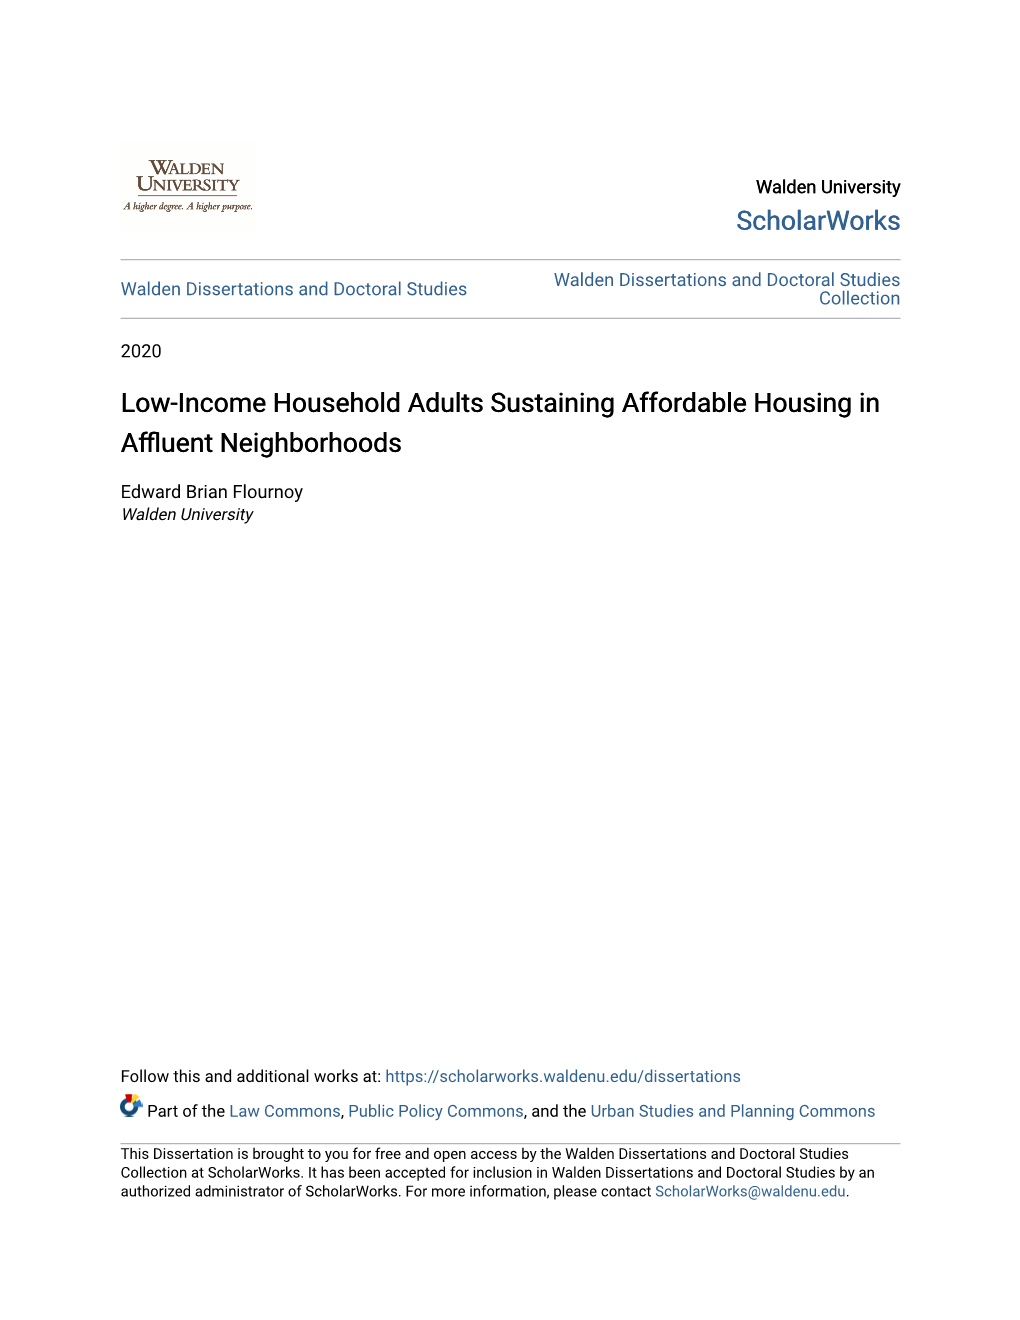 Low-Income Household Adults Sustaining Affordable Housing in Affluent Neighborhoods